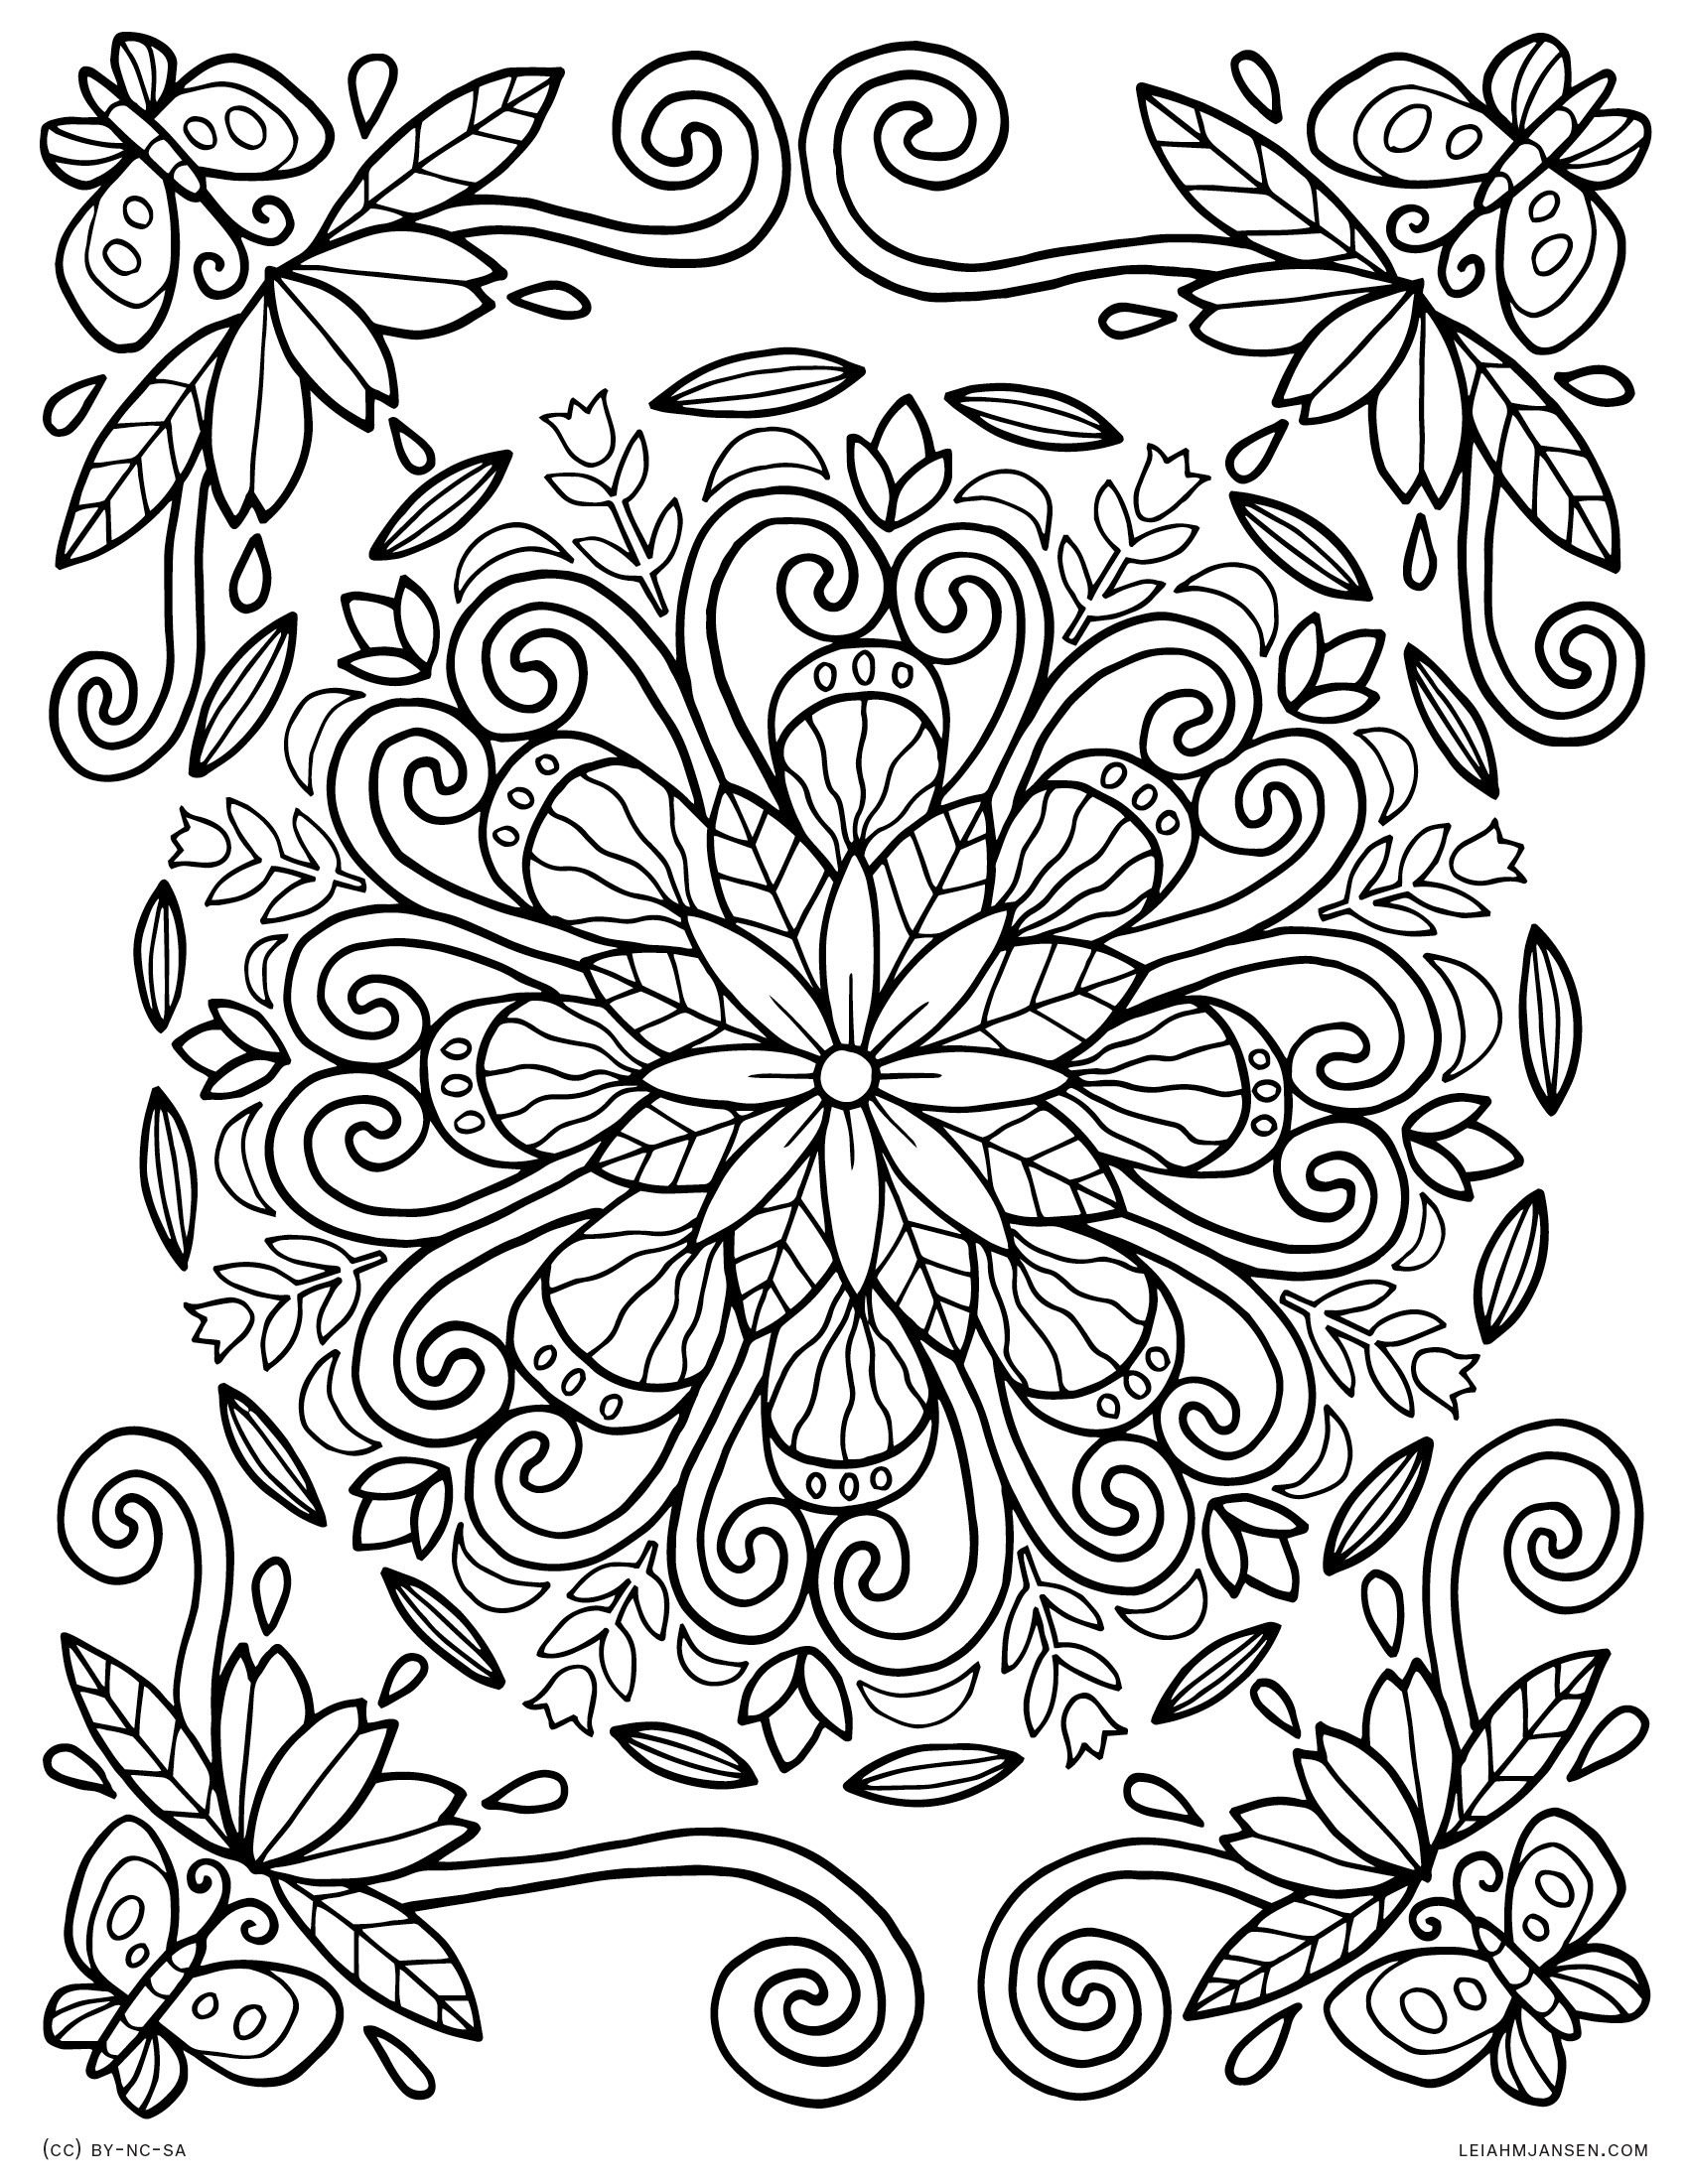 Tribal Design Coloring Pages at GetColorings.com | Free ...